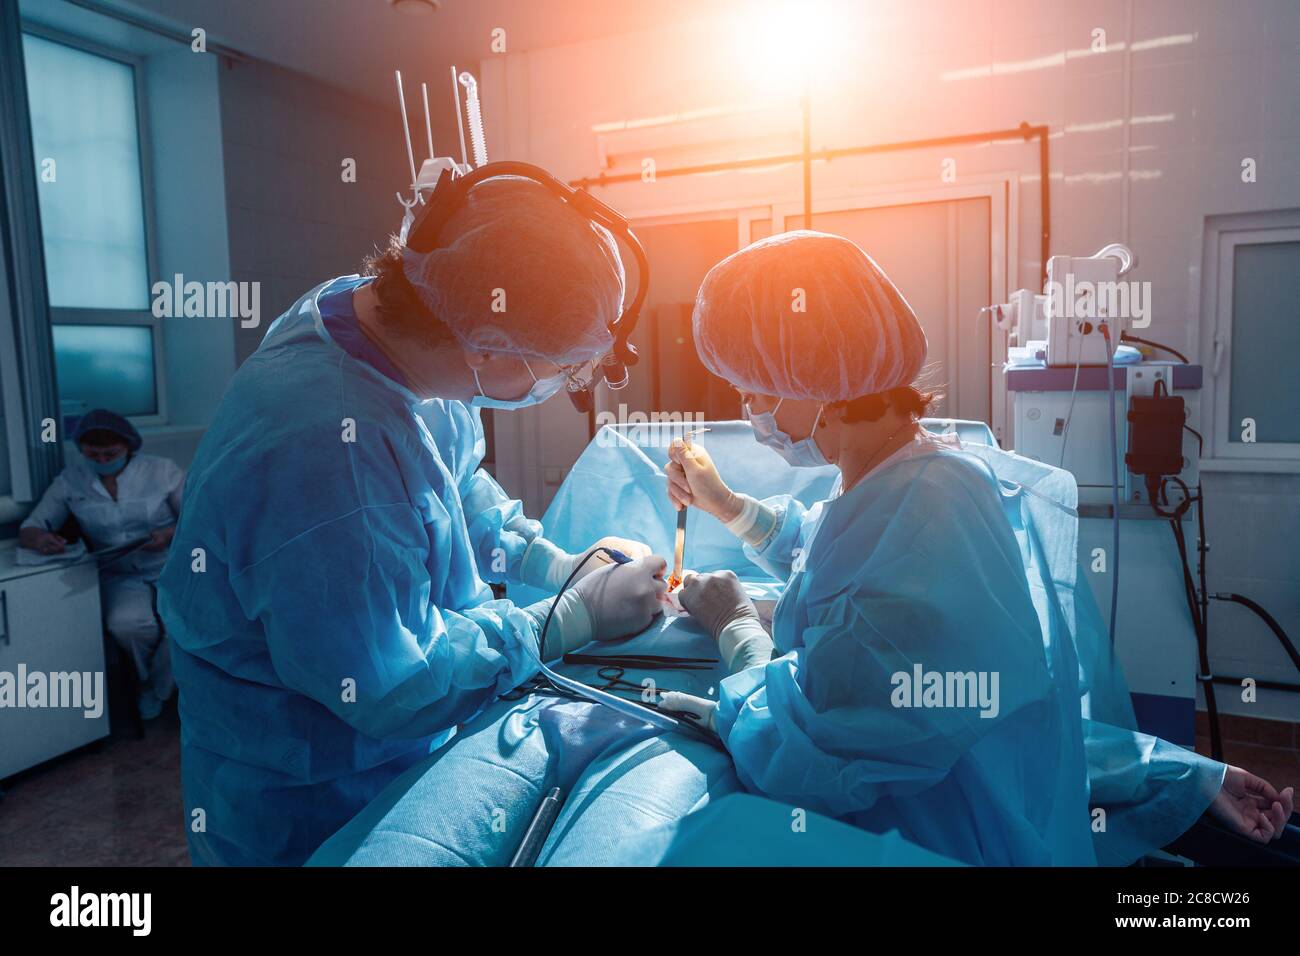 two veterinarian surgeons in operating room take with art lighting and blue filter Stock Photo